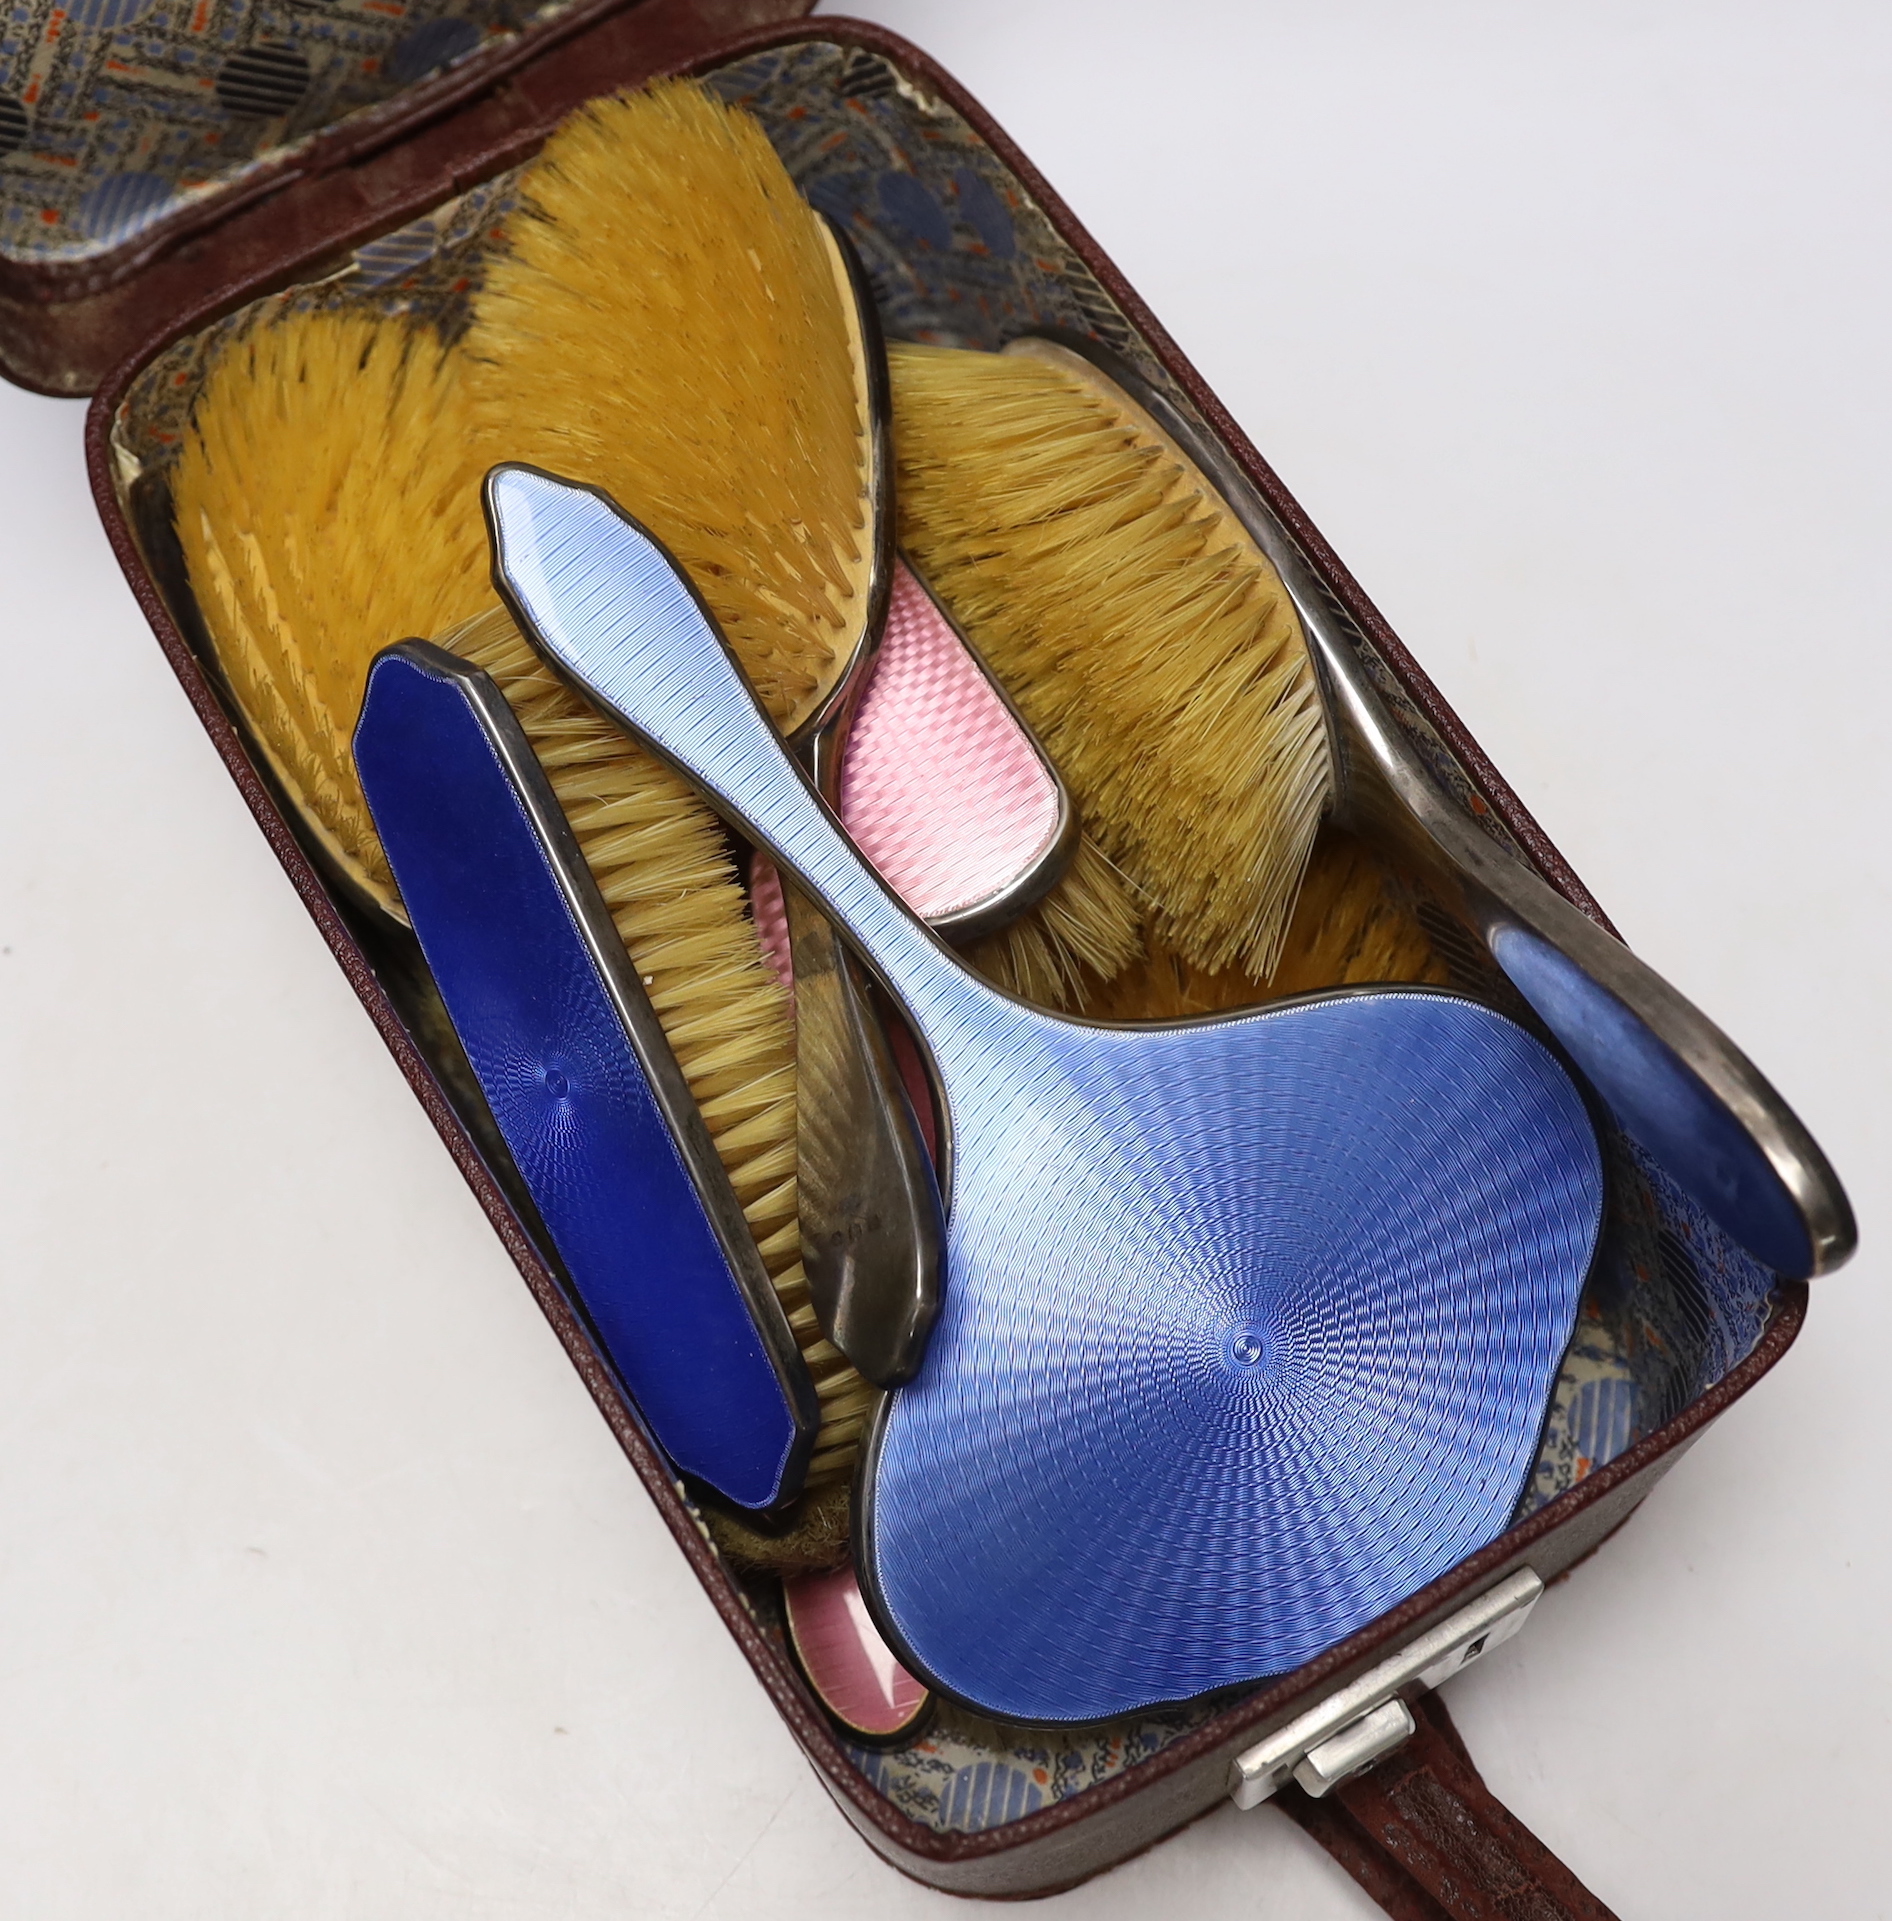 A George V silver and blue enamel five piece mirror and brush set, Birmingham, 1929 and a similar silver and pink enamel set, Birmingham, 1932.